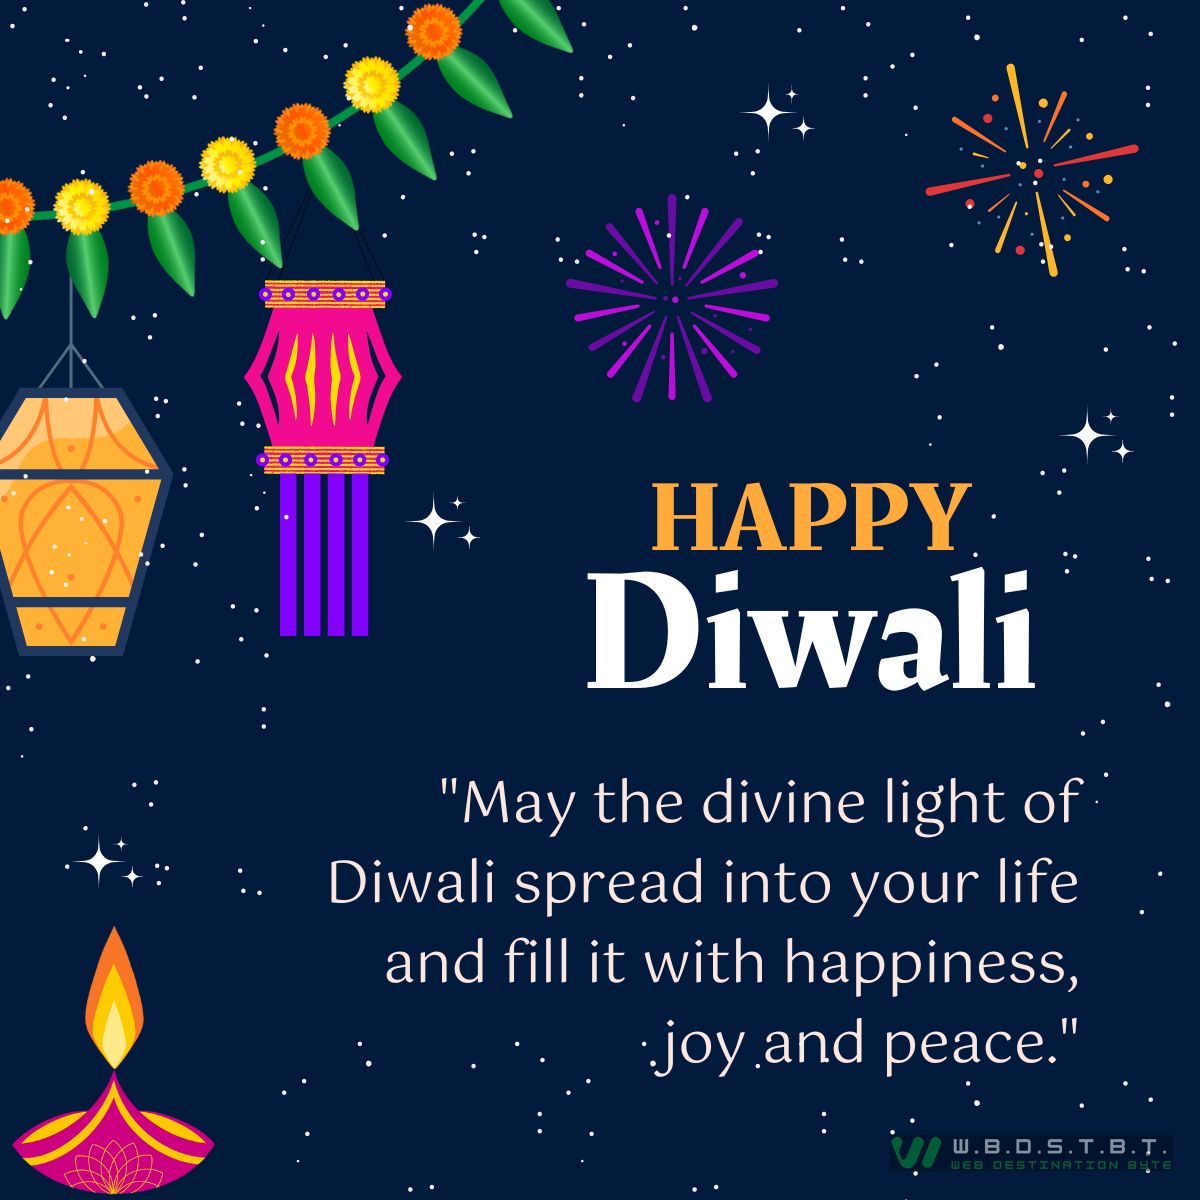 "May the divine light of Diwali spread into your life and fill it with happiness, joy and peace."